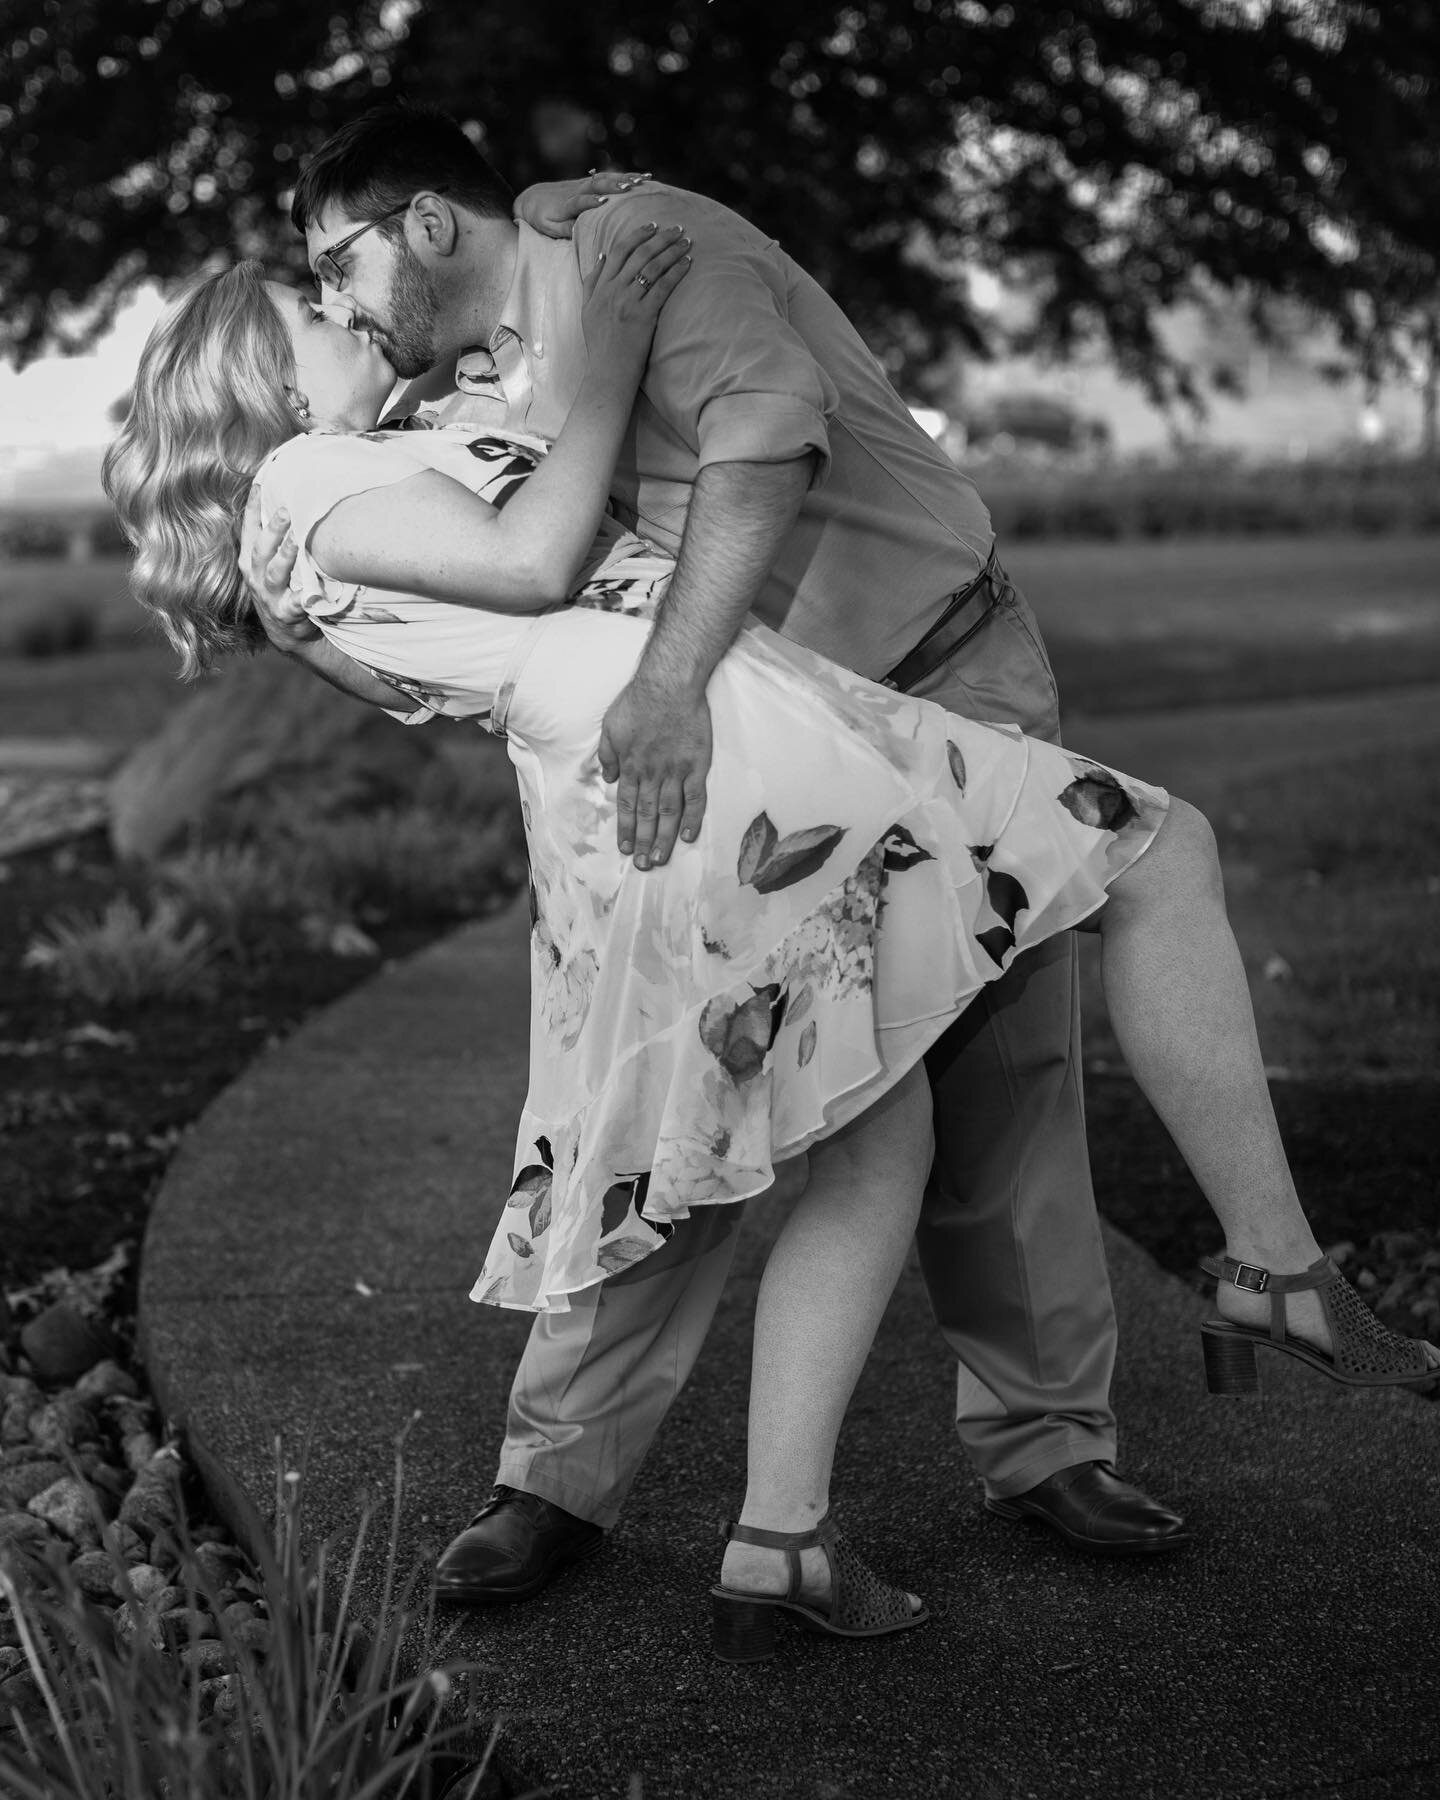 So I heard it&rsquo;s #nationalkissingday and had to share this shot of Rachel and Marshal!  #laurelhillphotography #wvweddingphotographer #wvweddingphotography #engagementphotos #june2022wedding #junebride